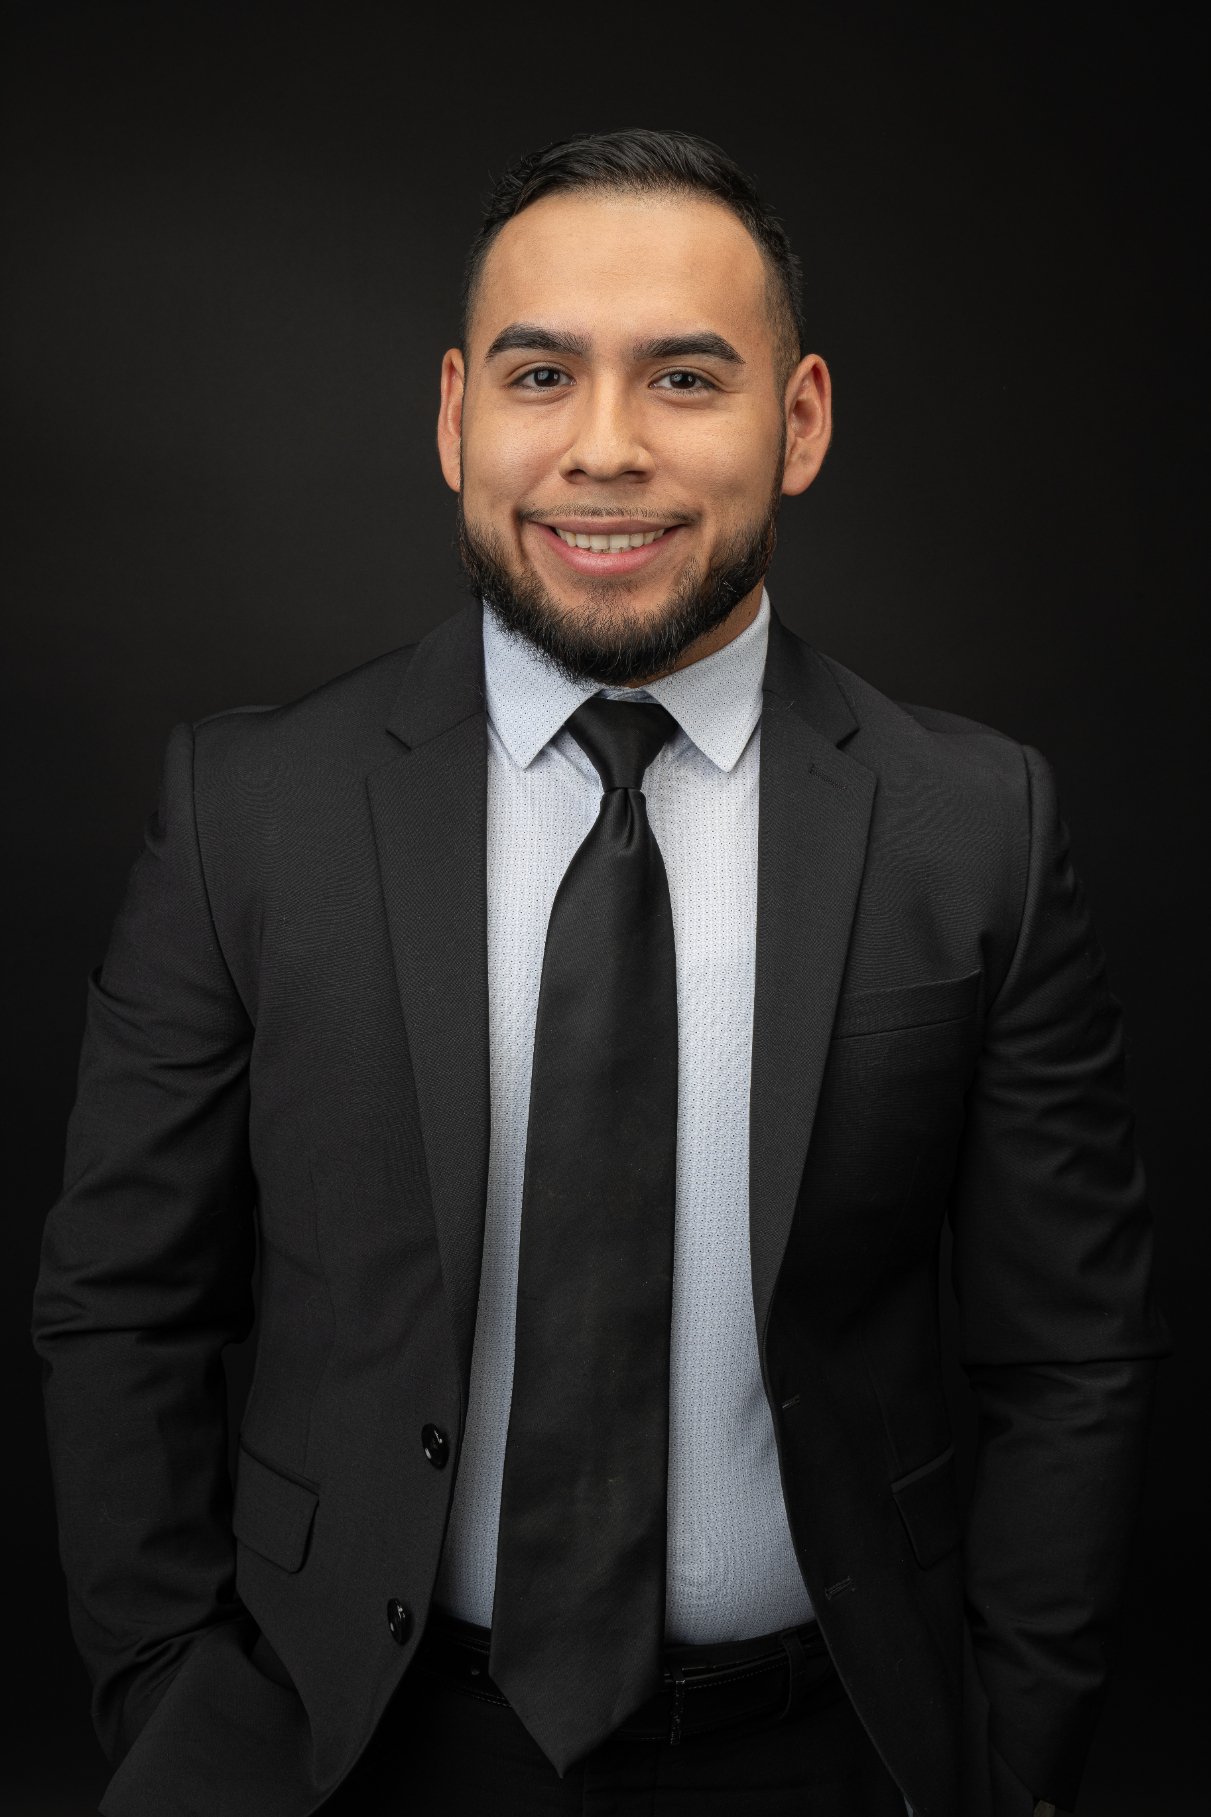 Christopher Ulloa has five solid years of experience in the legal field. He finds great satisfaction in helping people during a time of need by offering them guidance and assurance during a difficult time. With expertise in personal injury law, Ulloa supports attorneys and oversees case management at Hale Injury Law.